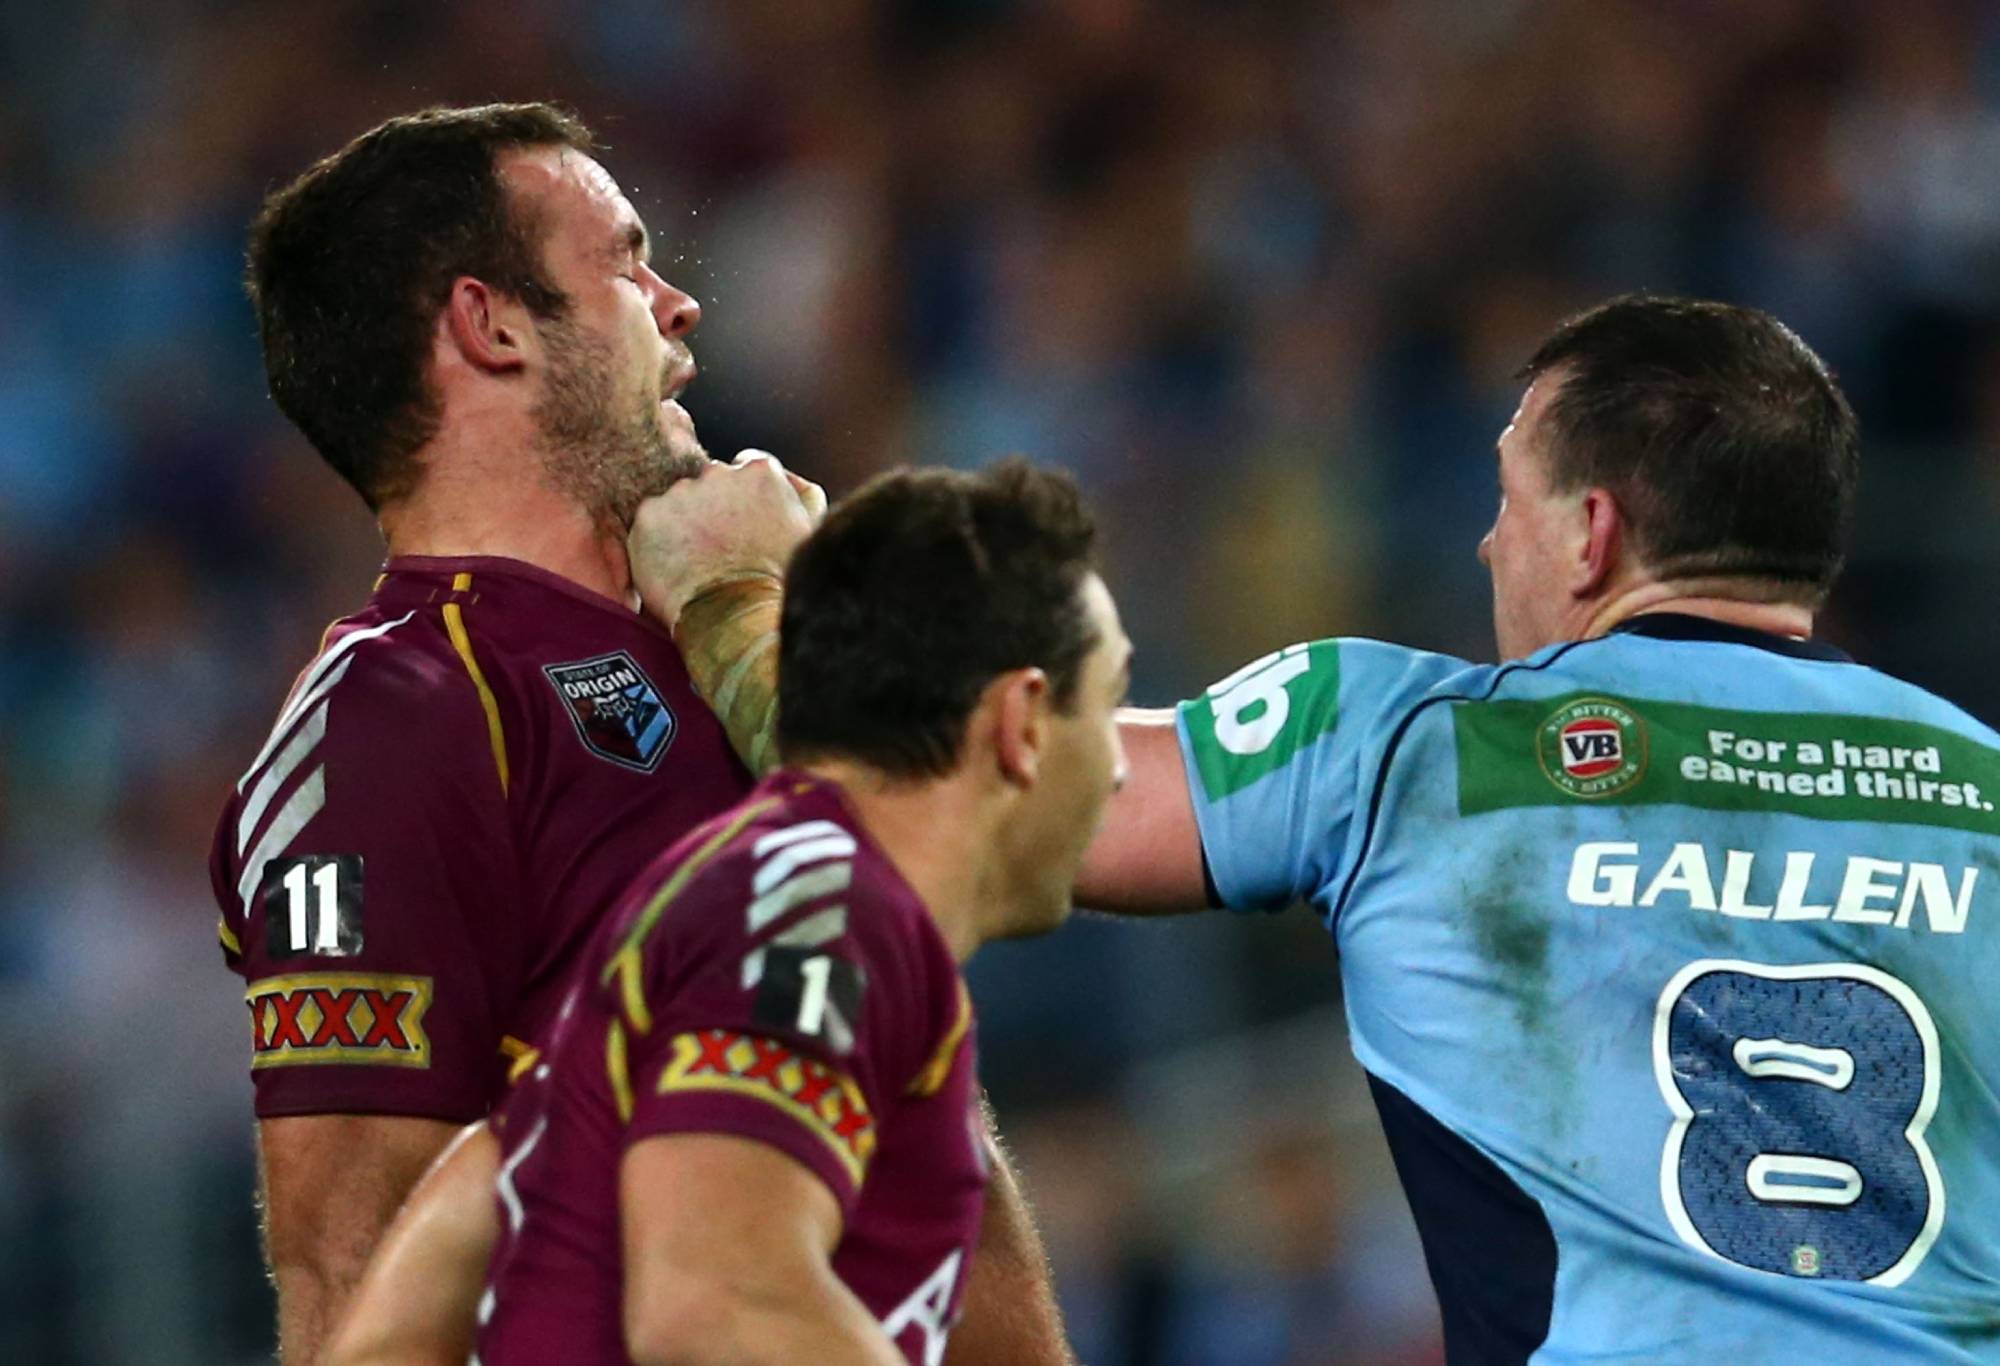 Paul Gallen of the Blues punches Nate Myles of the Maroons during game one of the ARL State of Origin series between the New South Wales Blues and the Queensland Maroons at ANZ Stadium on June 5, 2013 in Sydney, Australia. (Photo by Mark Kolbe/Getty Images)